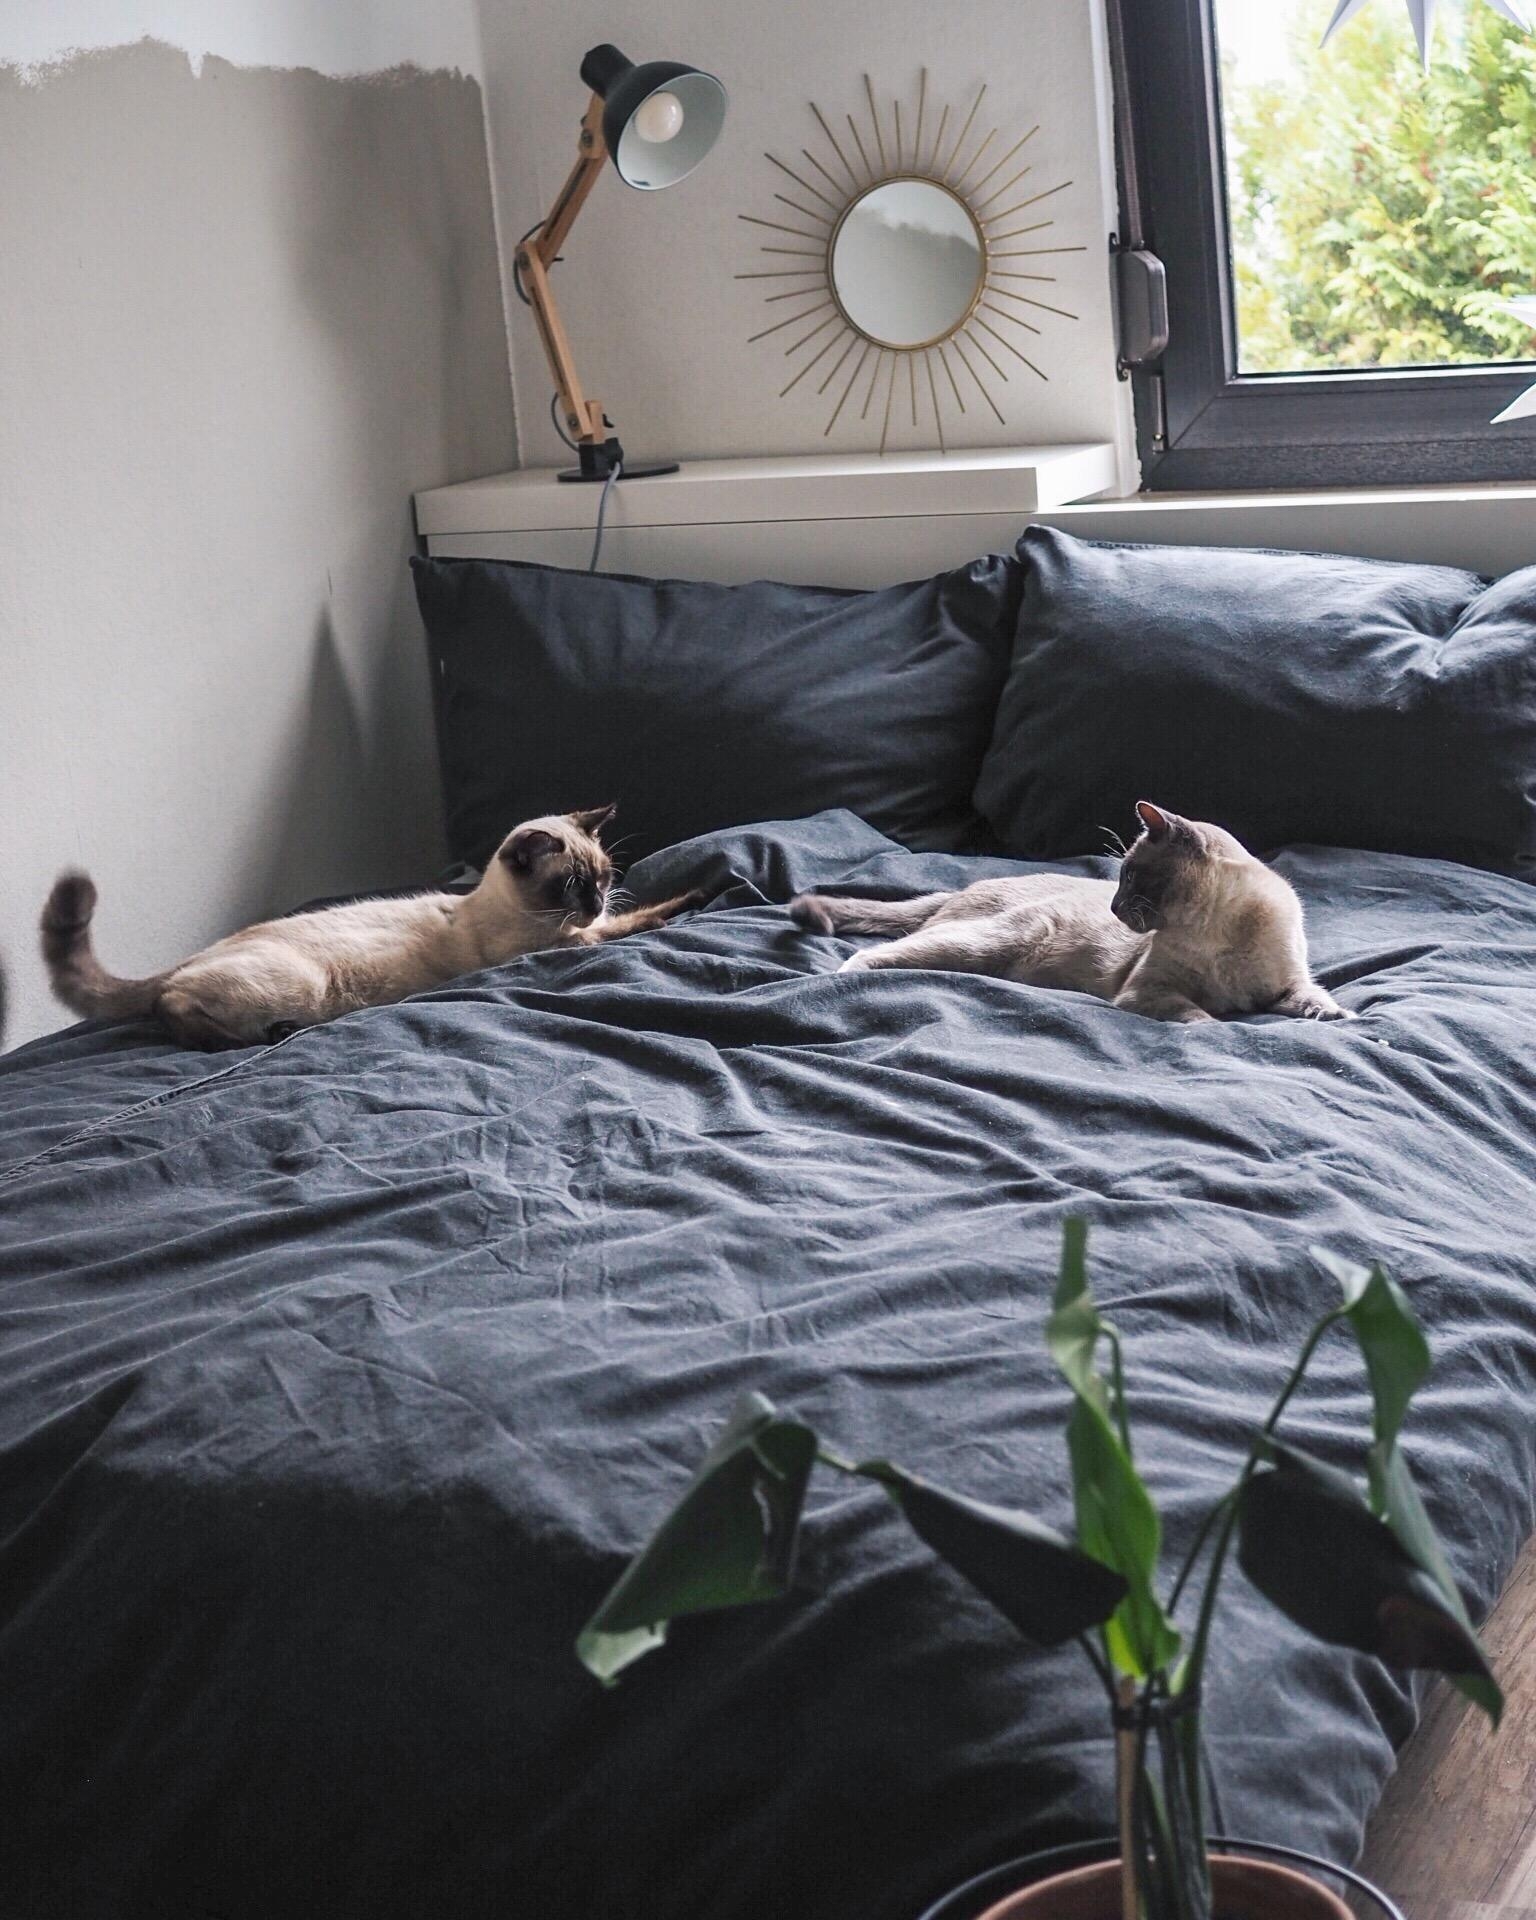 #skandistyle #couchliebt #bedroom #meowdels #myhome